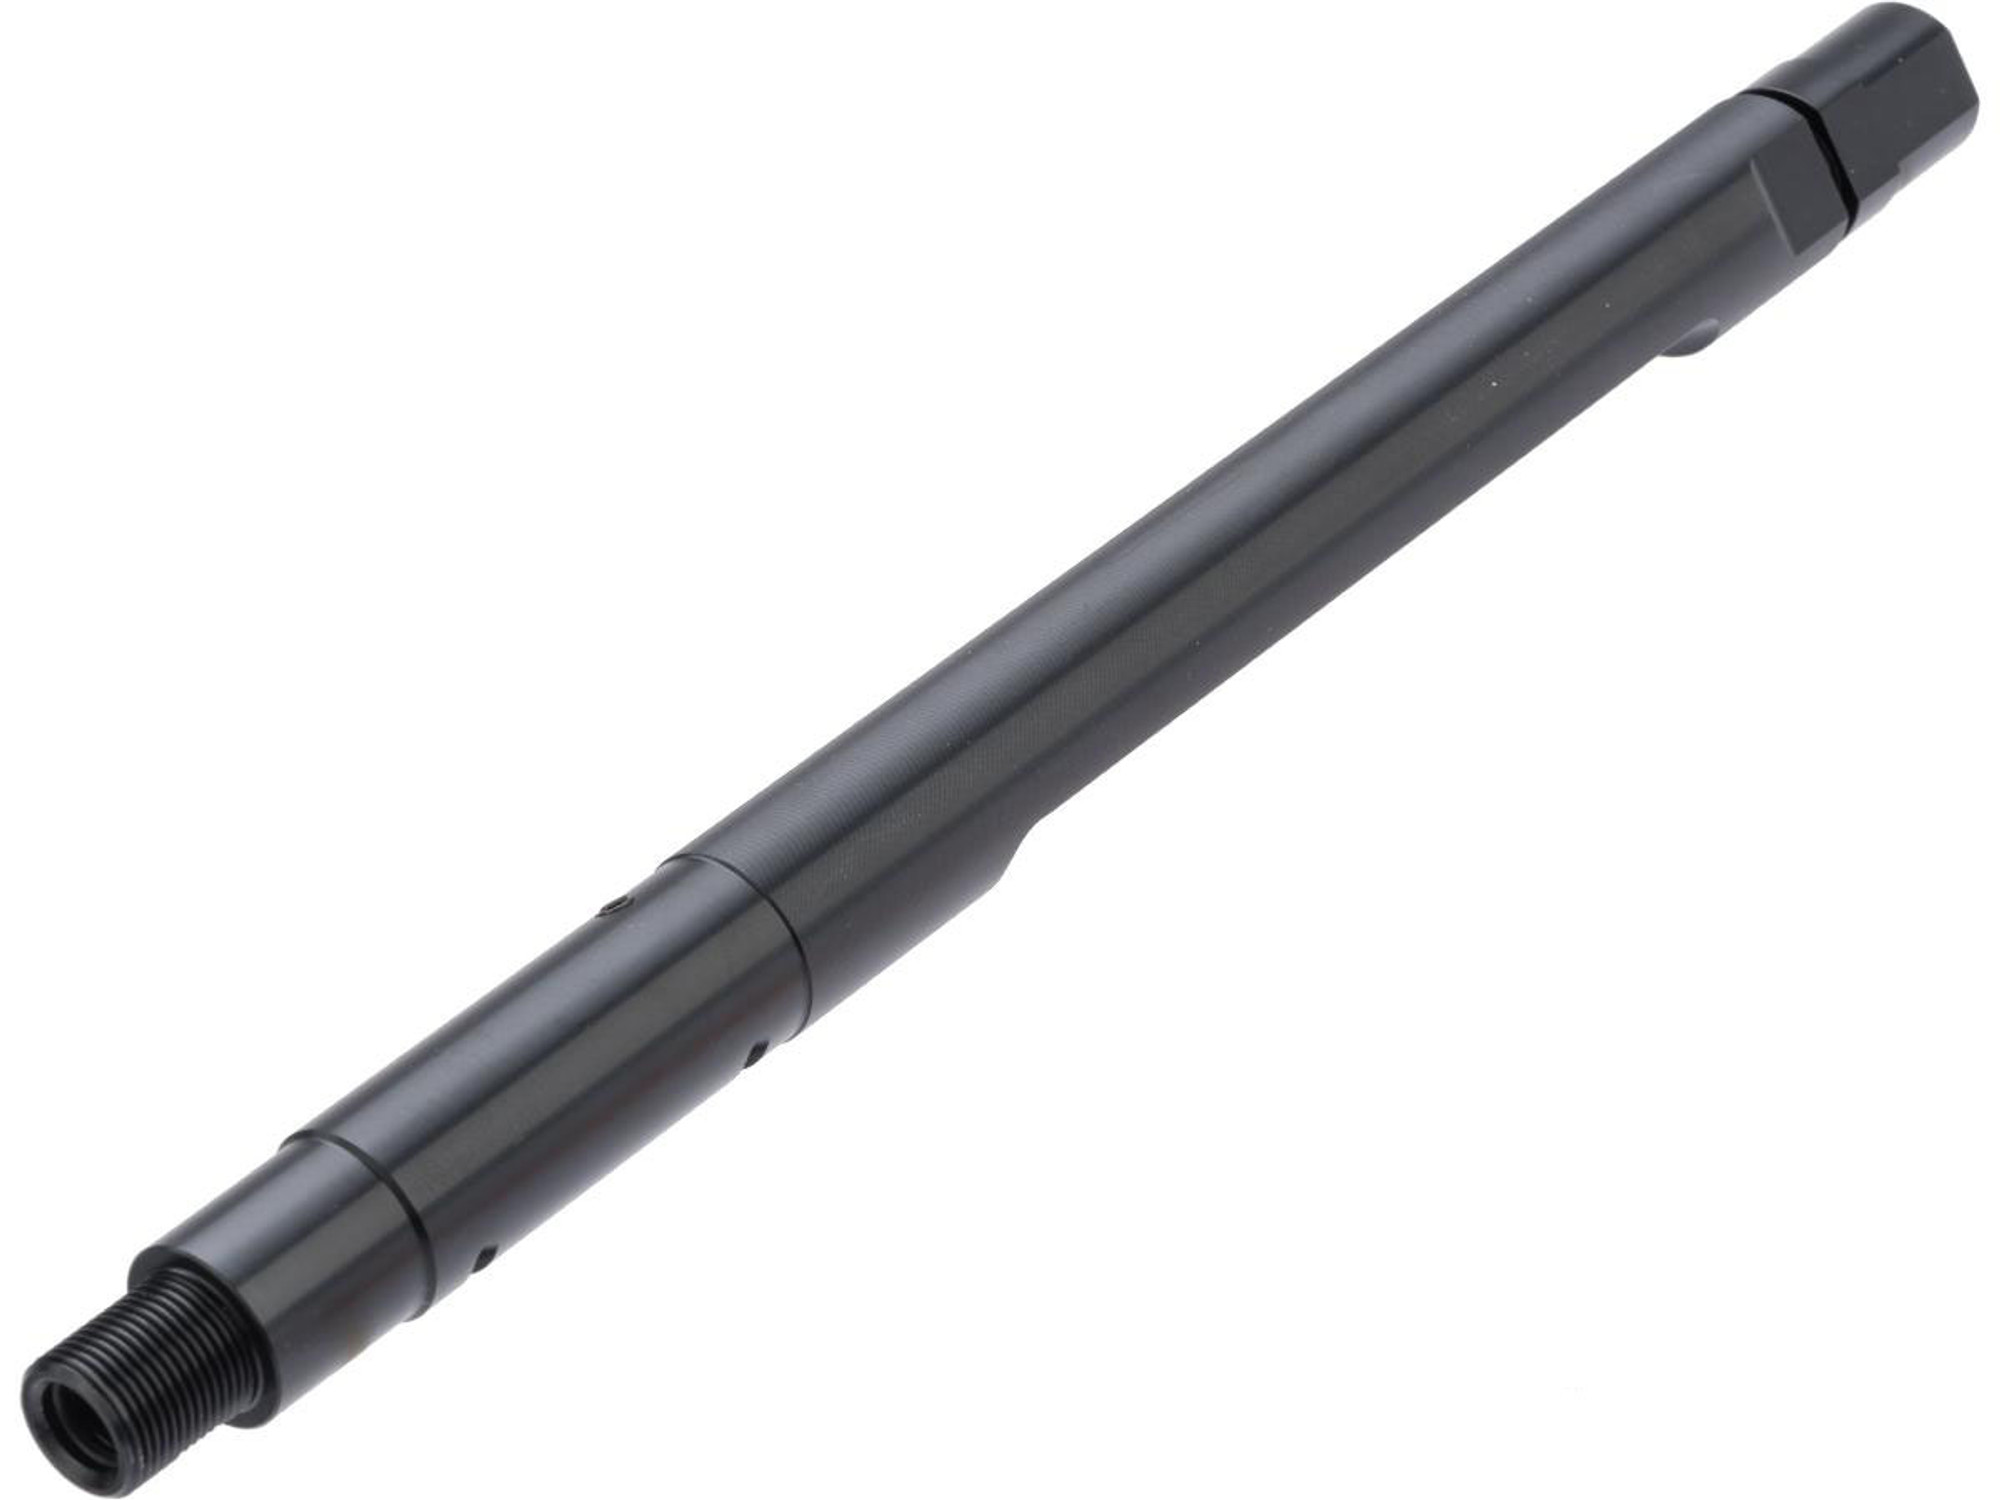 Laylax SOPMOD Outer Barrel for TM M4 NGRS Airsoft AEG Rifles